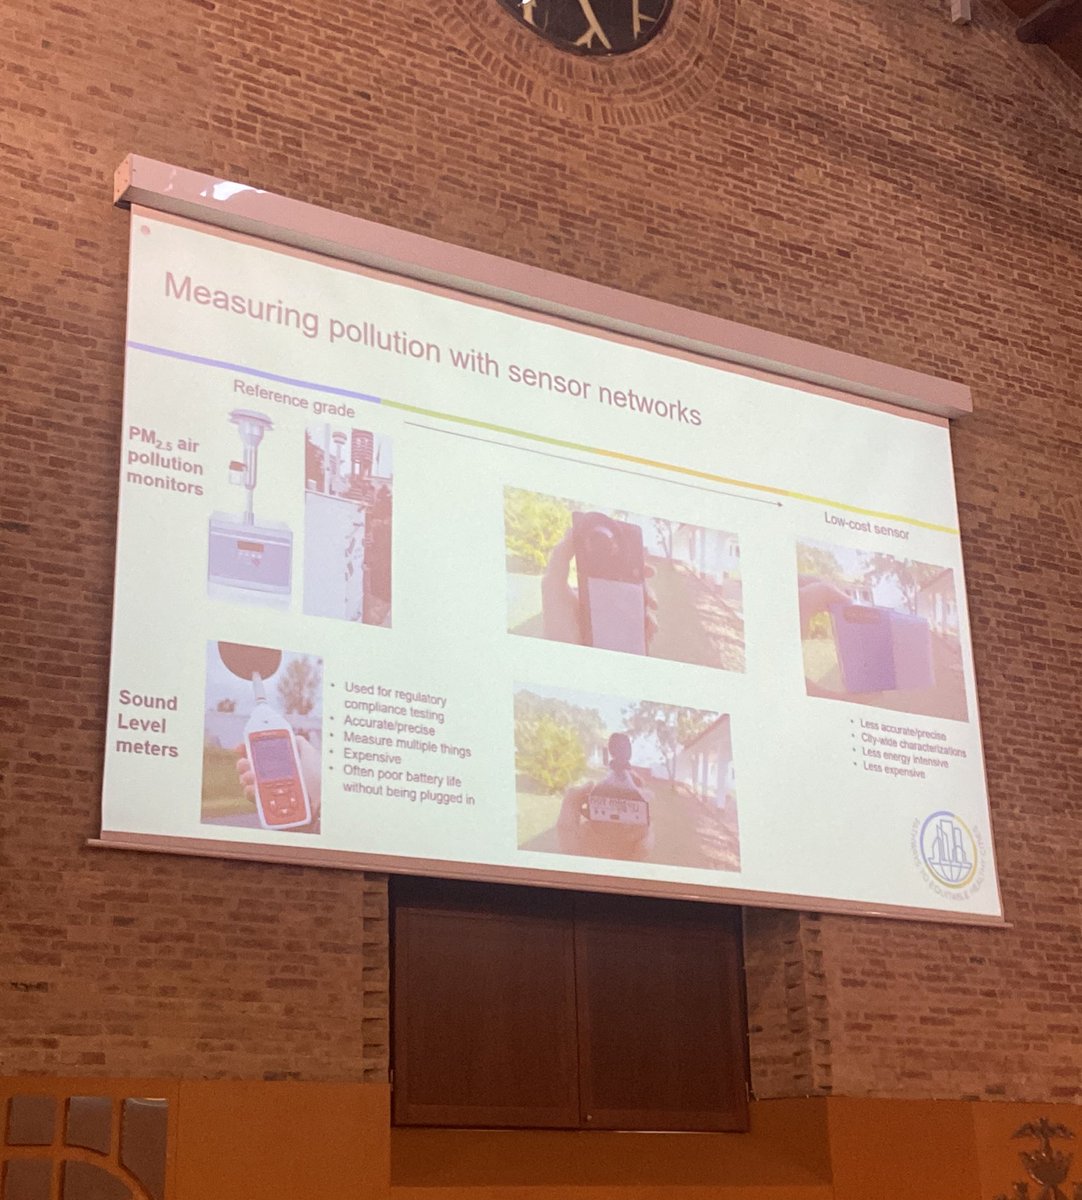 @sierraclark2 presents on the why and how of sensor network operation and data for mapping air and noise pollution, with lessons learned from @Pathways2Equity work in Accra, Ghana #PathwaysICUH #ICUH22